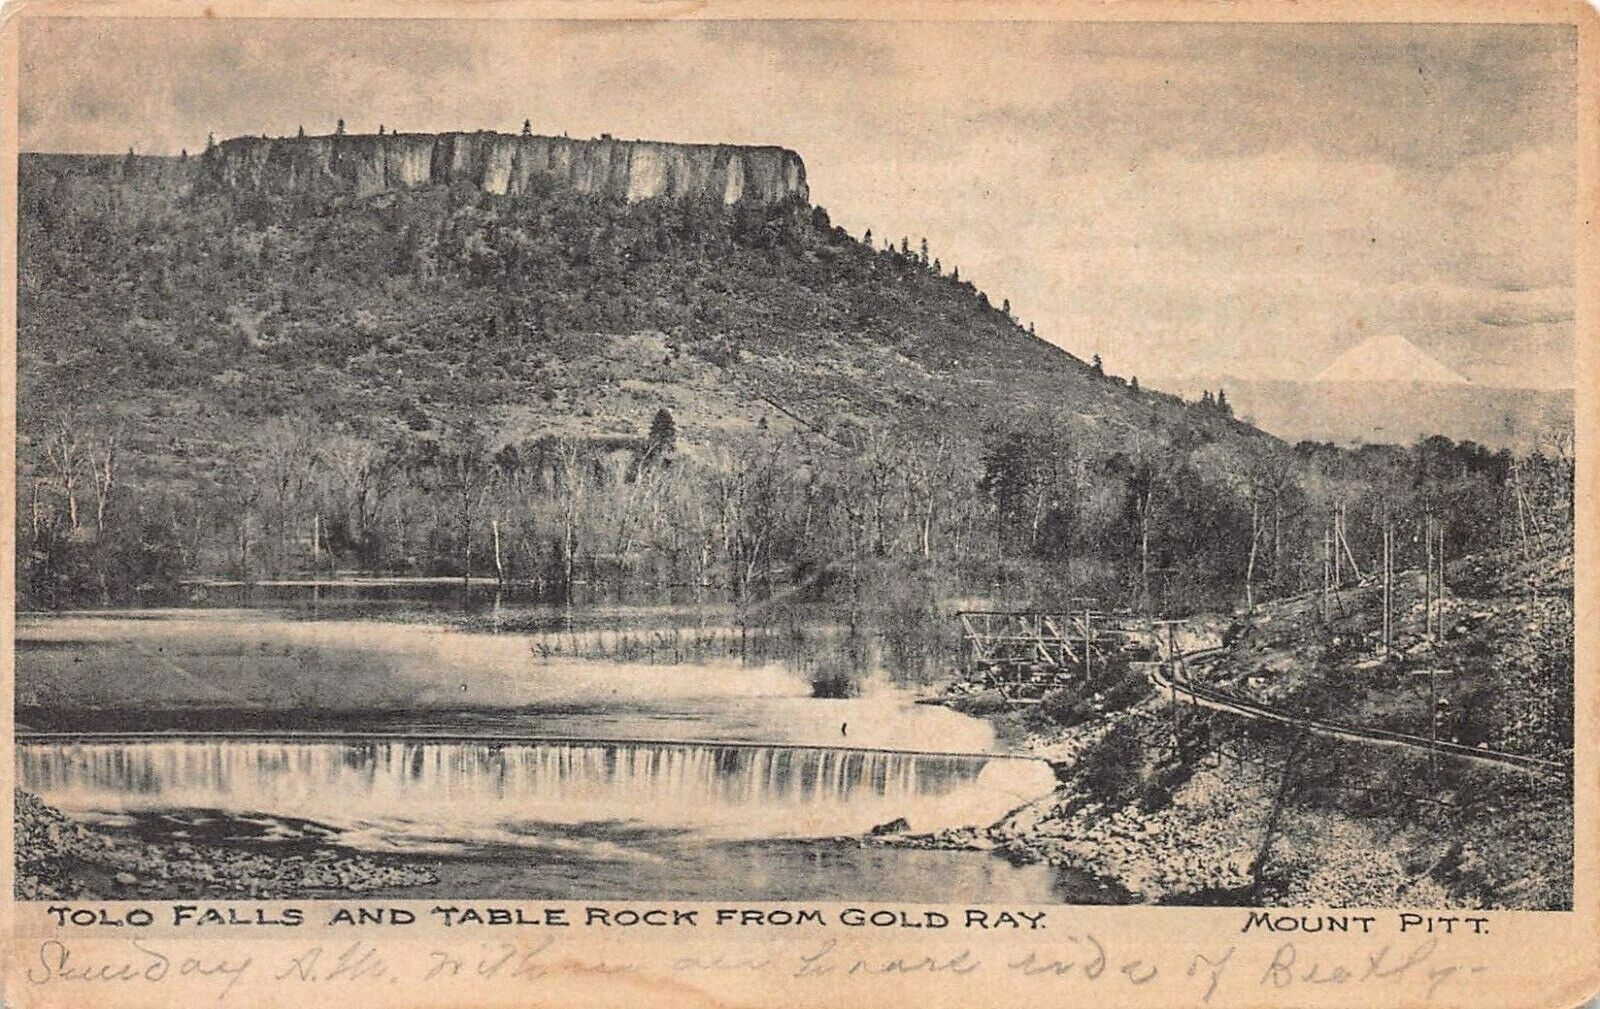 Tolo Falls & Table Rock from Gold Ray, Mt. Pitt, OR, 1906 postcard, used